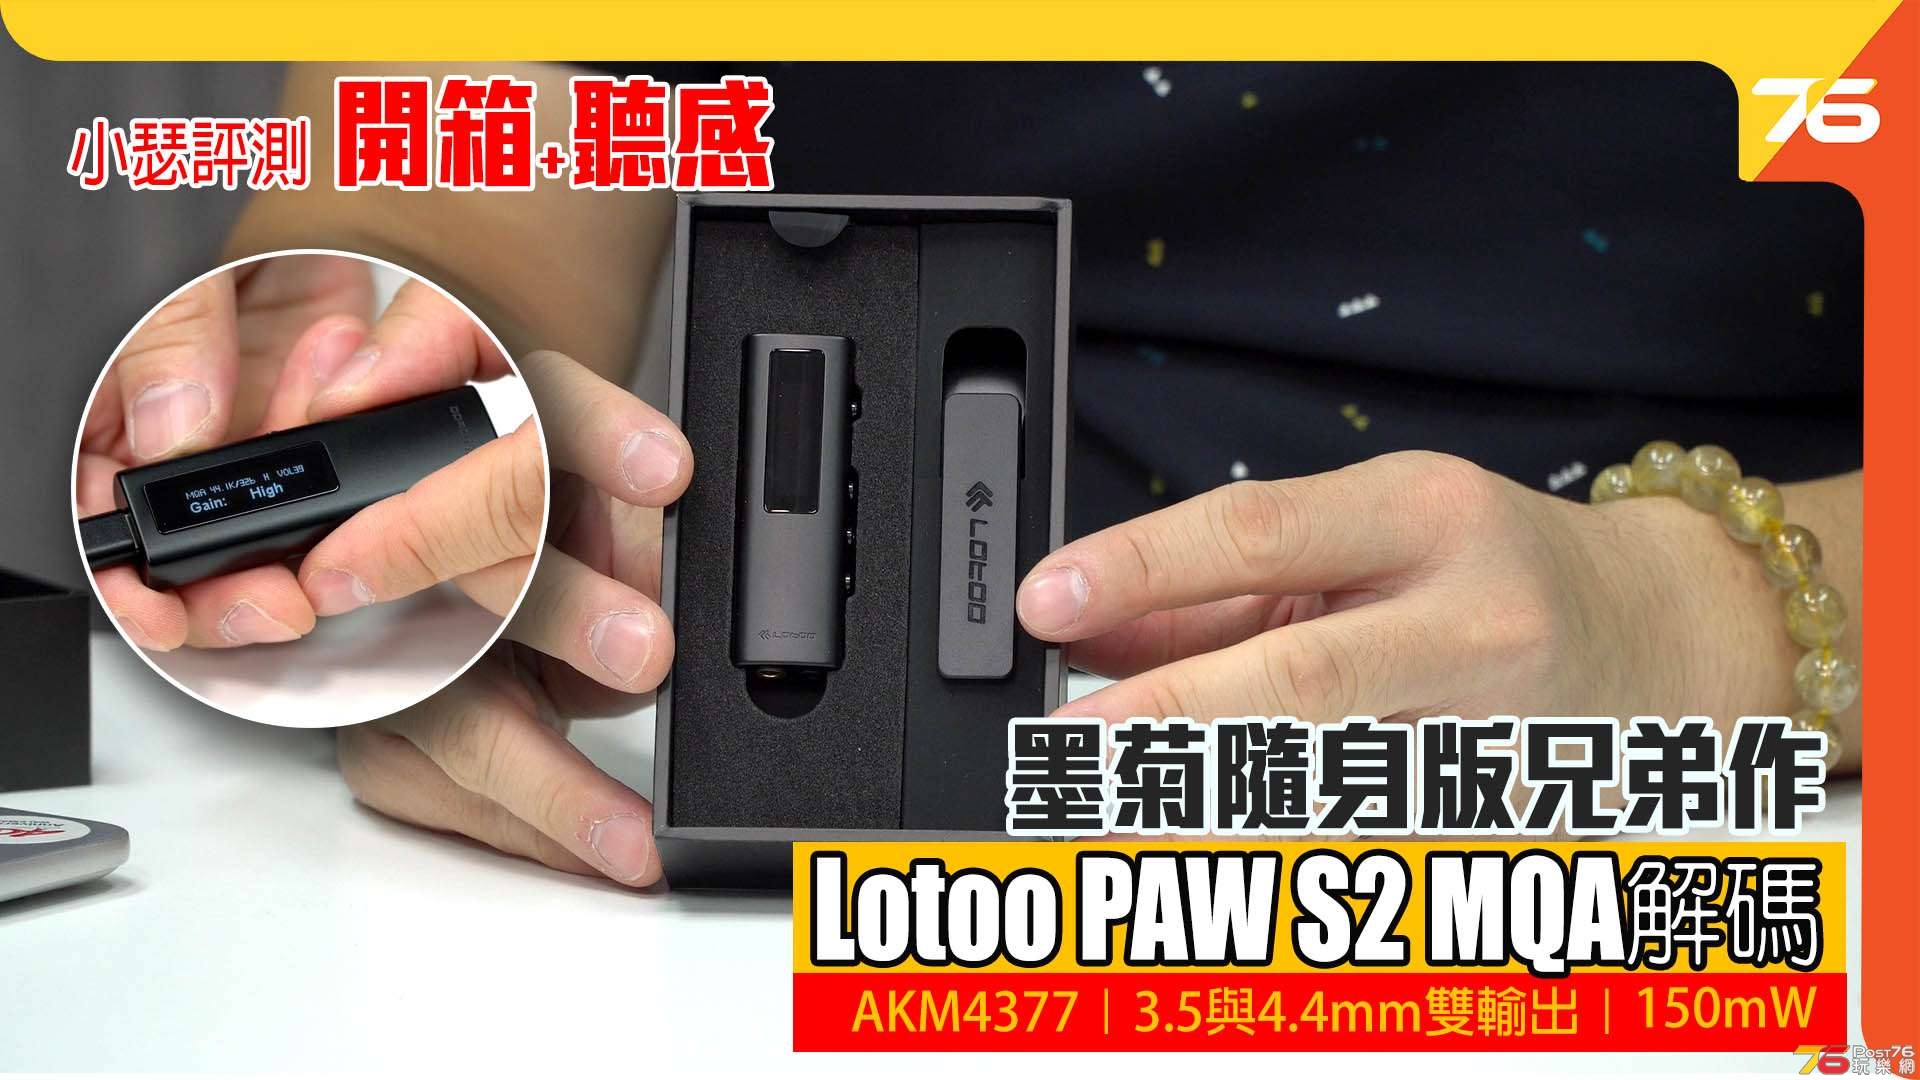 lotoo paw s2 review YT.jpg